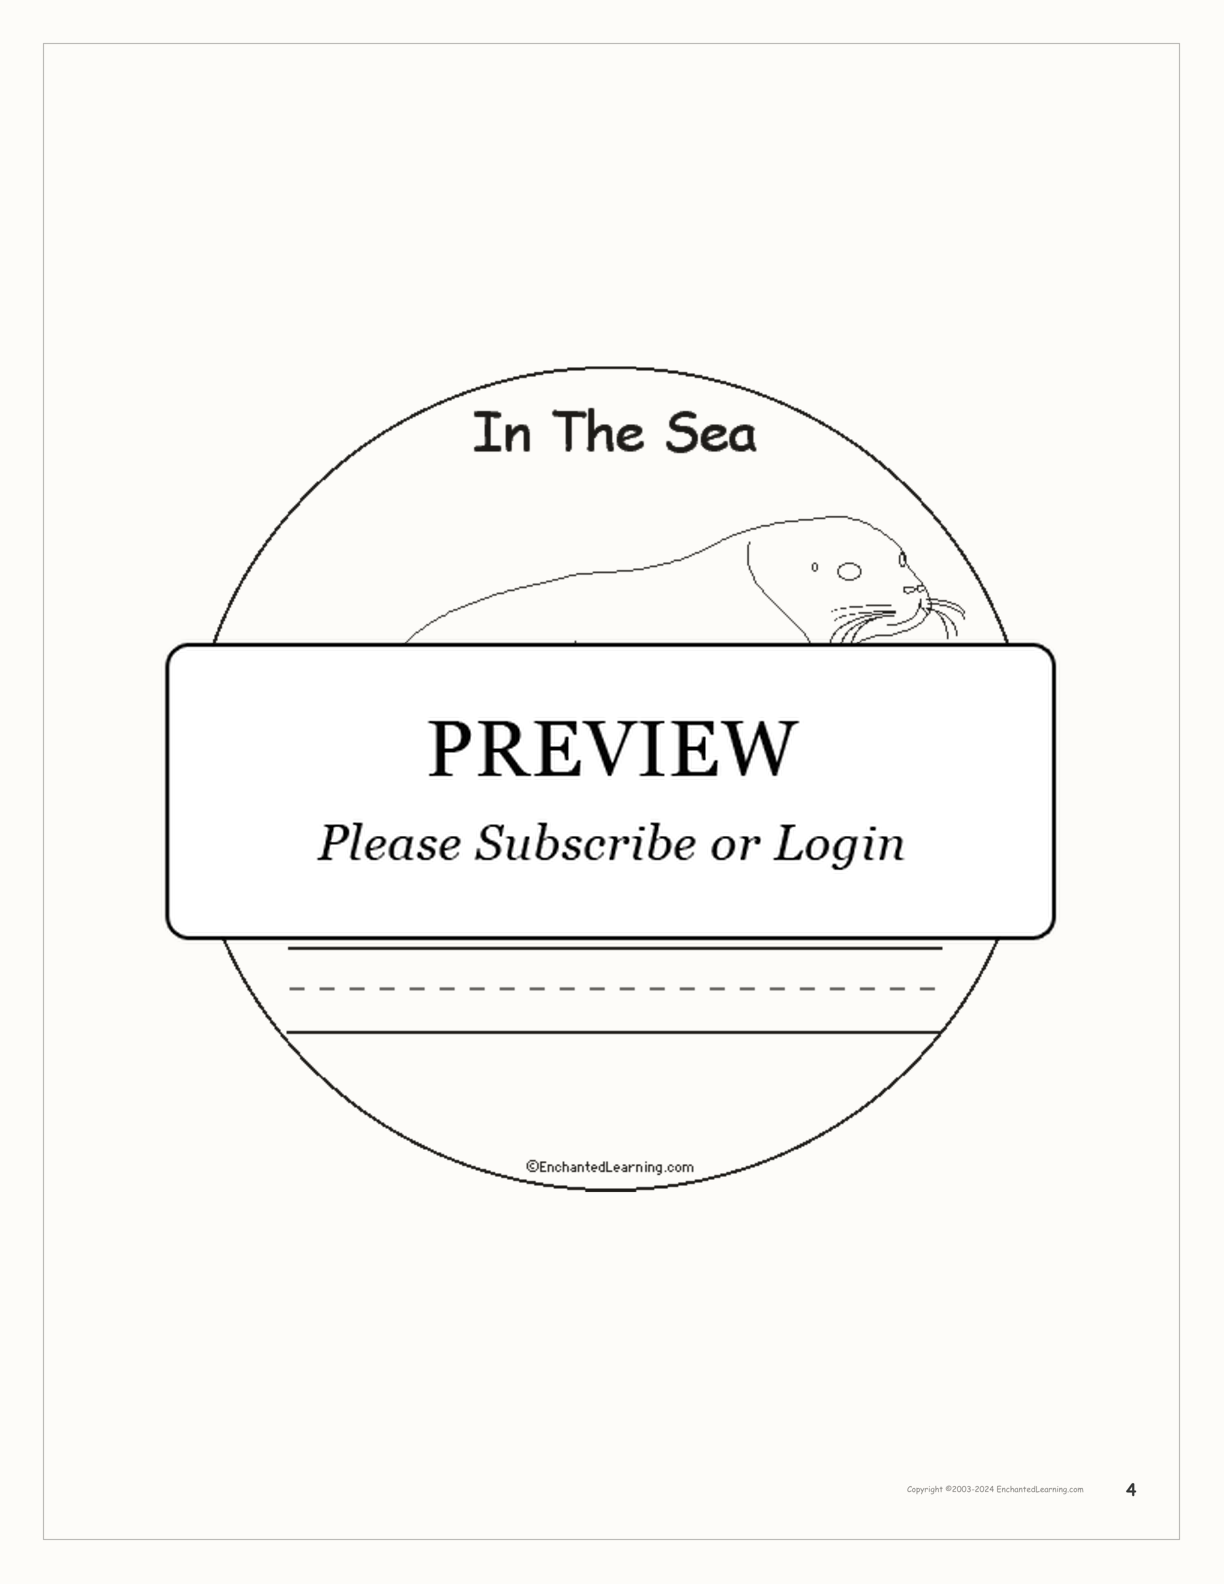 In The Sea: Early Reader Book interactive printout page 4